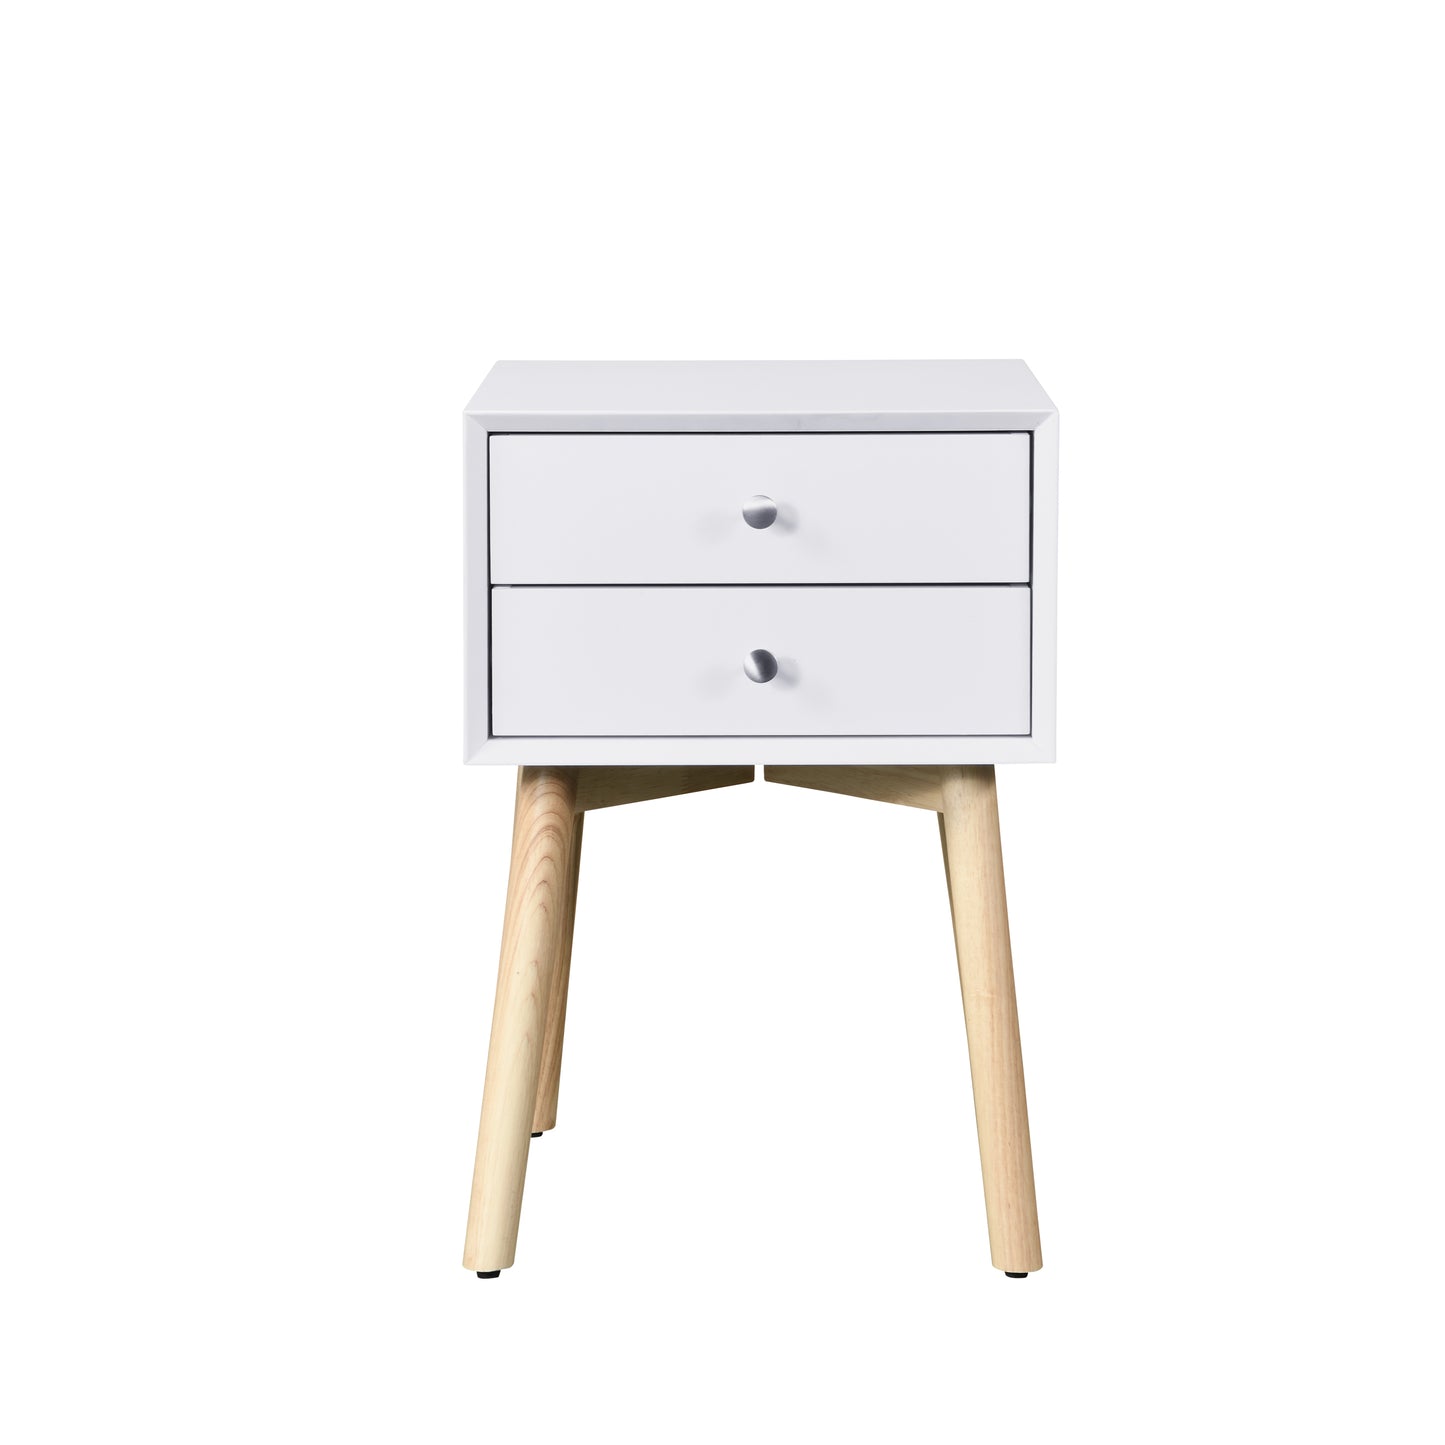 Side Table, Bedside Table with 2 Drawers and Rubber Wood Legs, Mid-Century Modern Storage Cabinet for Bedroom Living Room, White